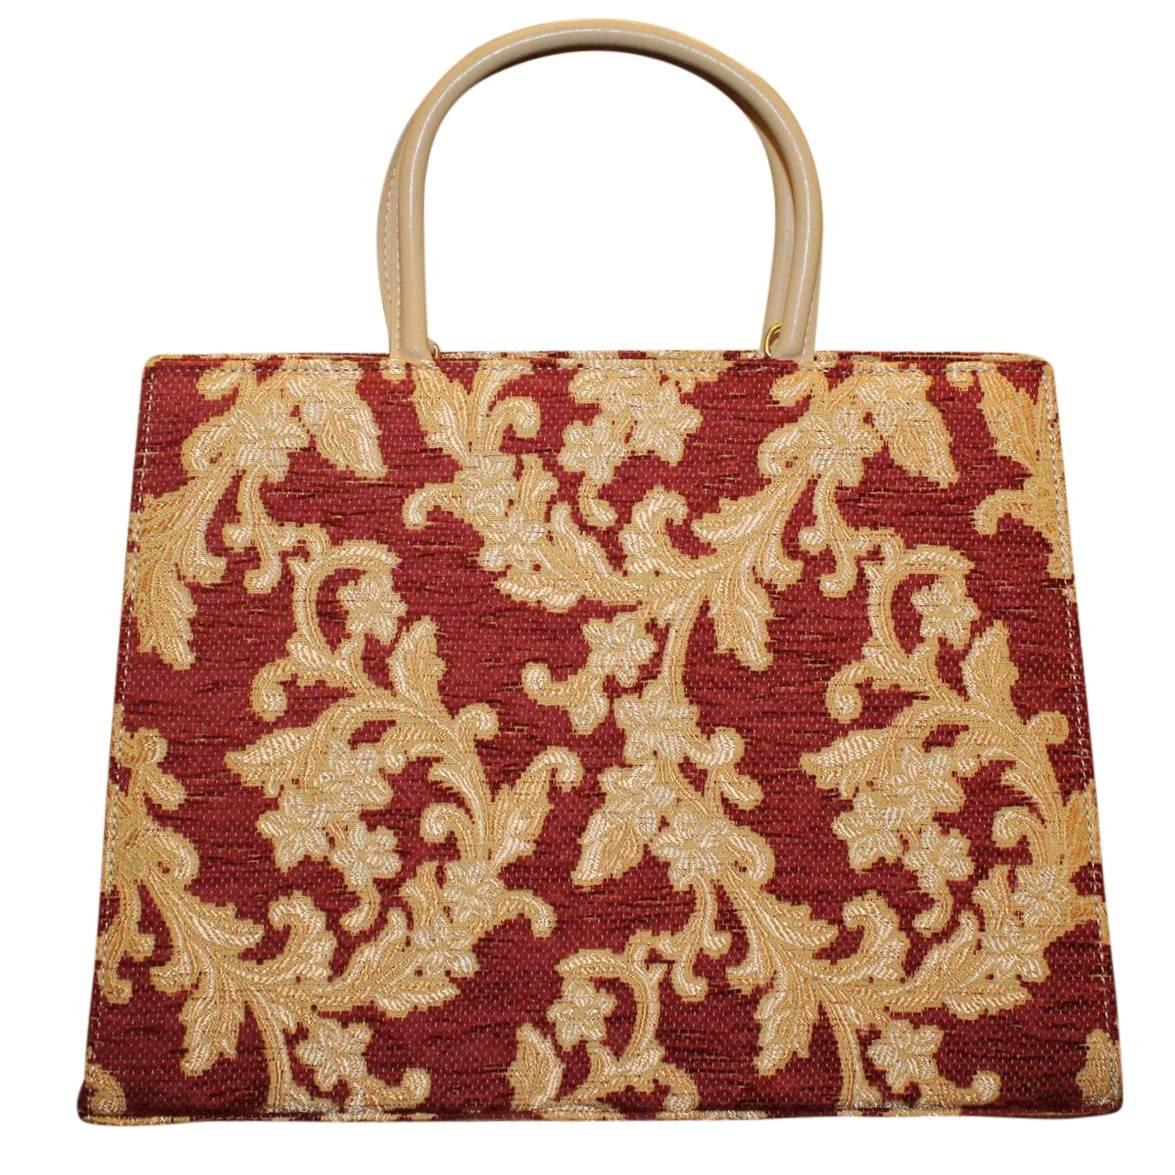 Stunning Carlo Zini Milano jewel bag
One of the world's best bijoux designers
Unique piece !
Red textile
Yellow/ochre embroidery
Wonderful golden metal, crystals and swarovsky applications
Floral pattern
Beige leather handles
Internal zip